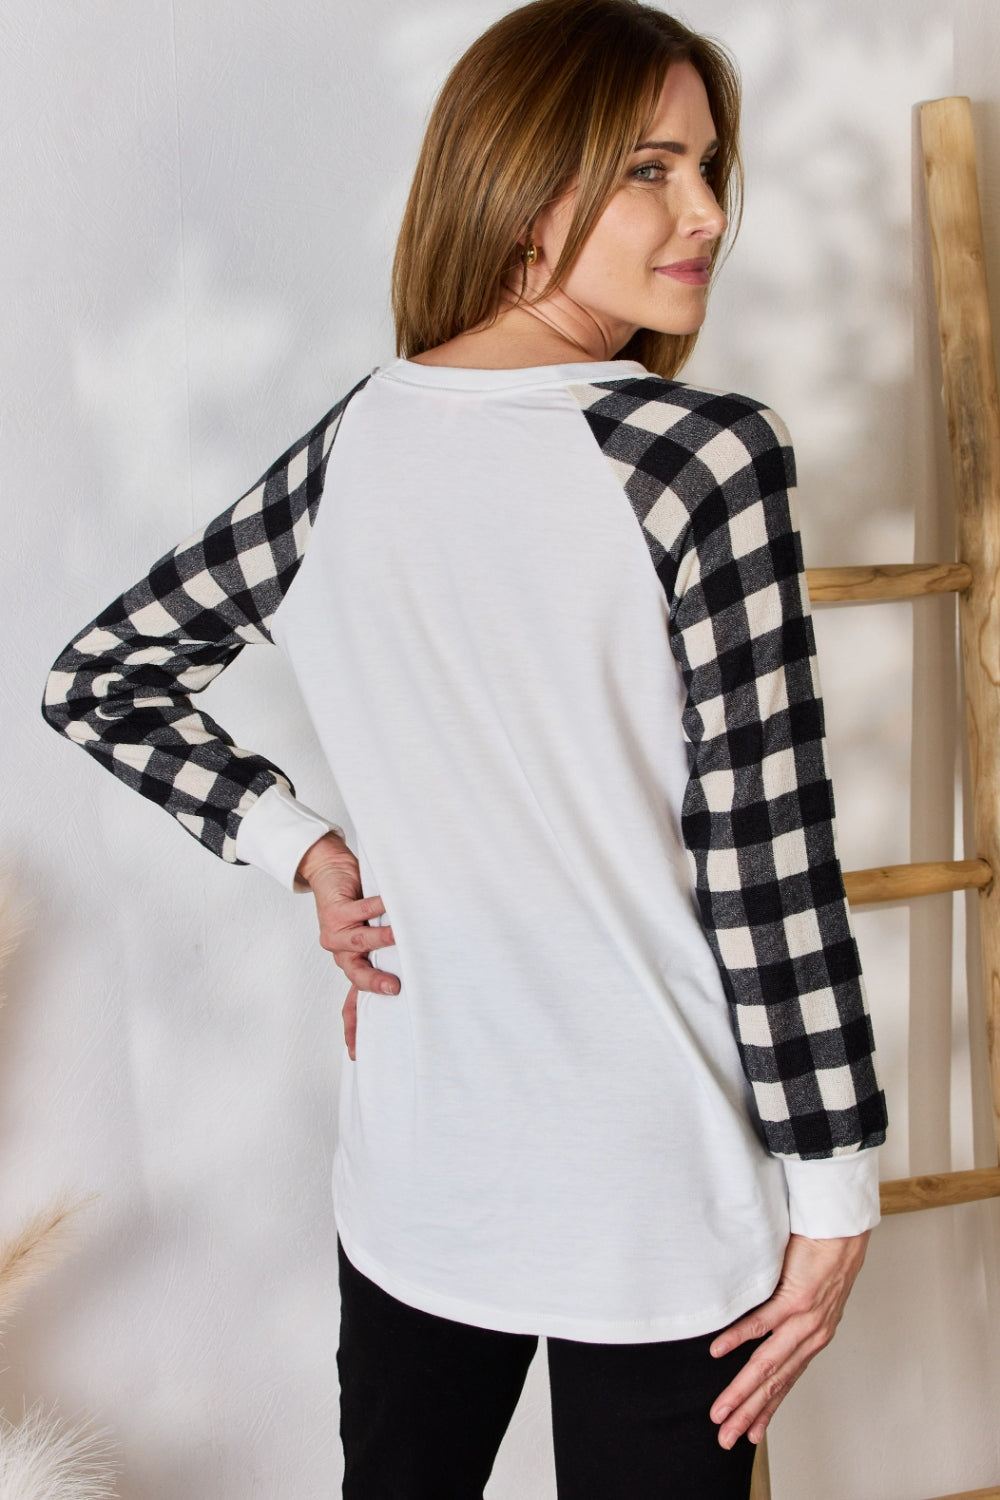 Black and White Plaid Long Sleeve Shirt - Inspired Eye Boutique